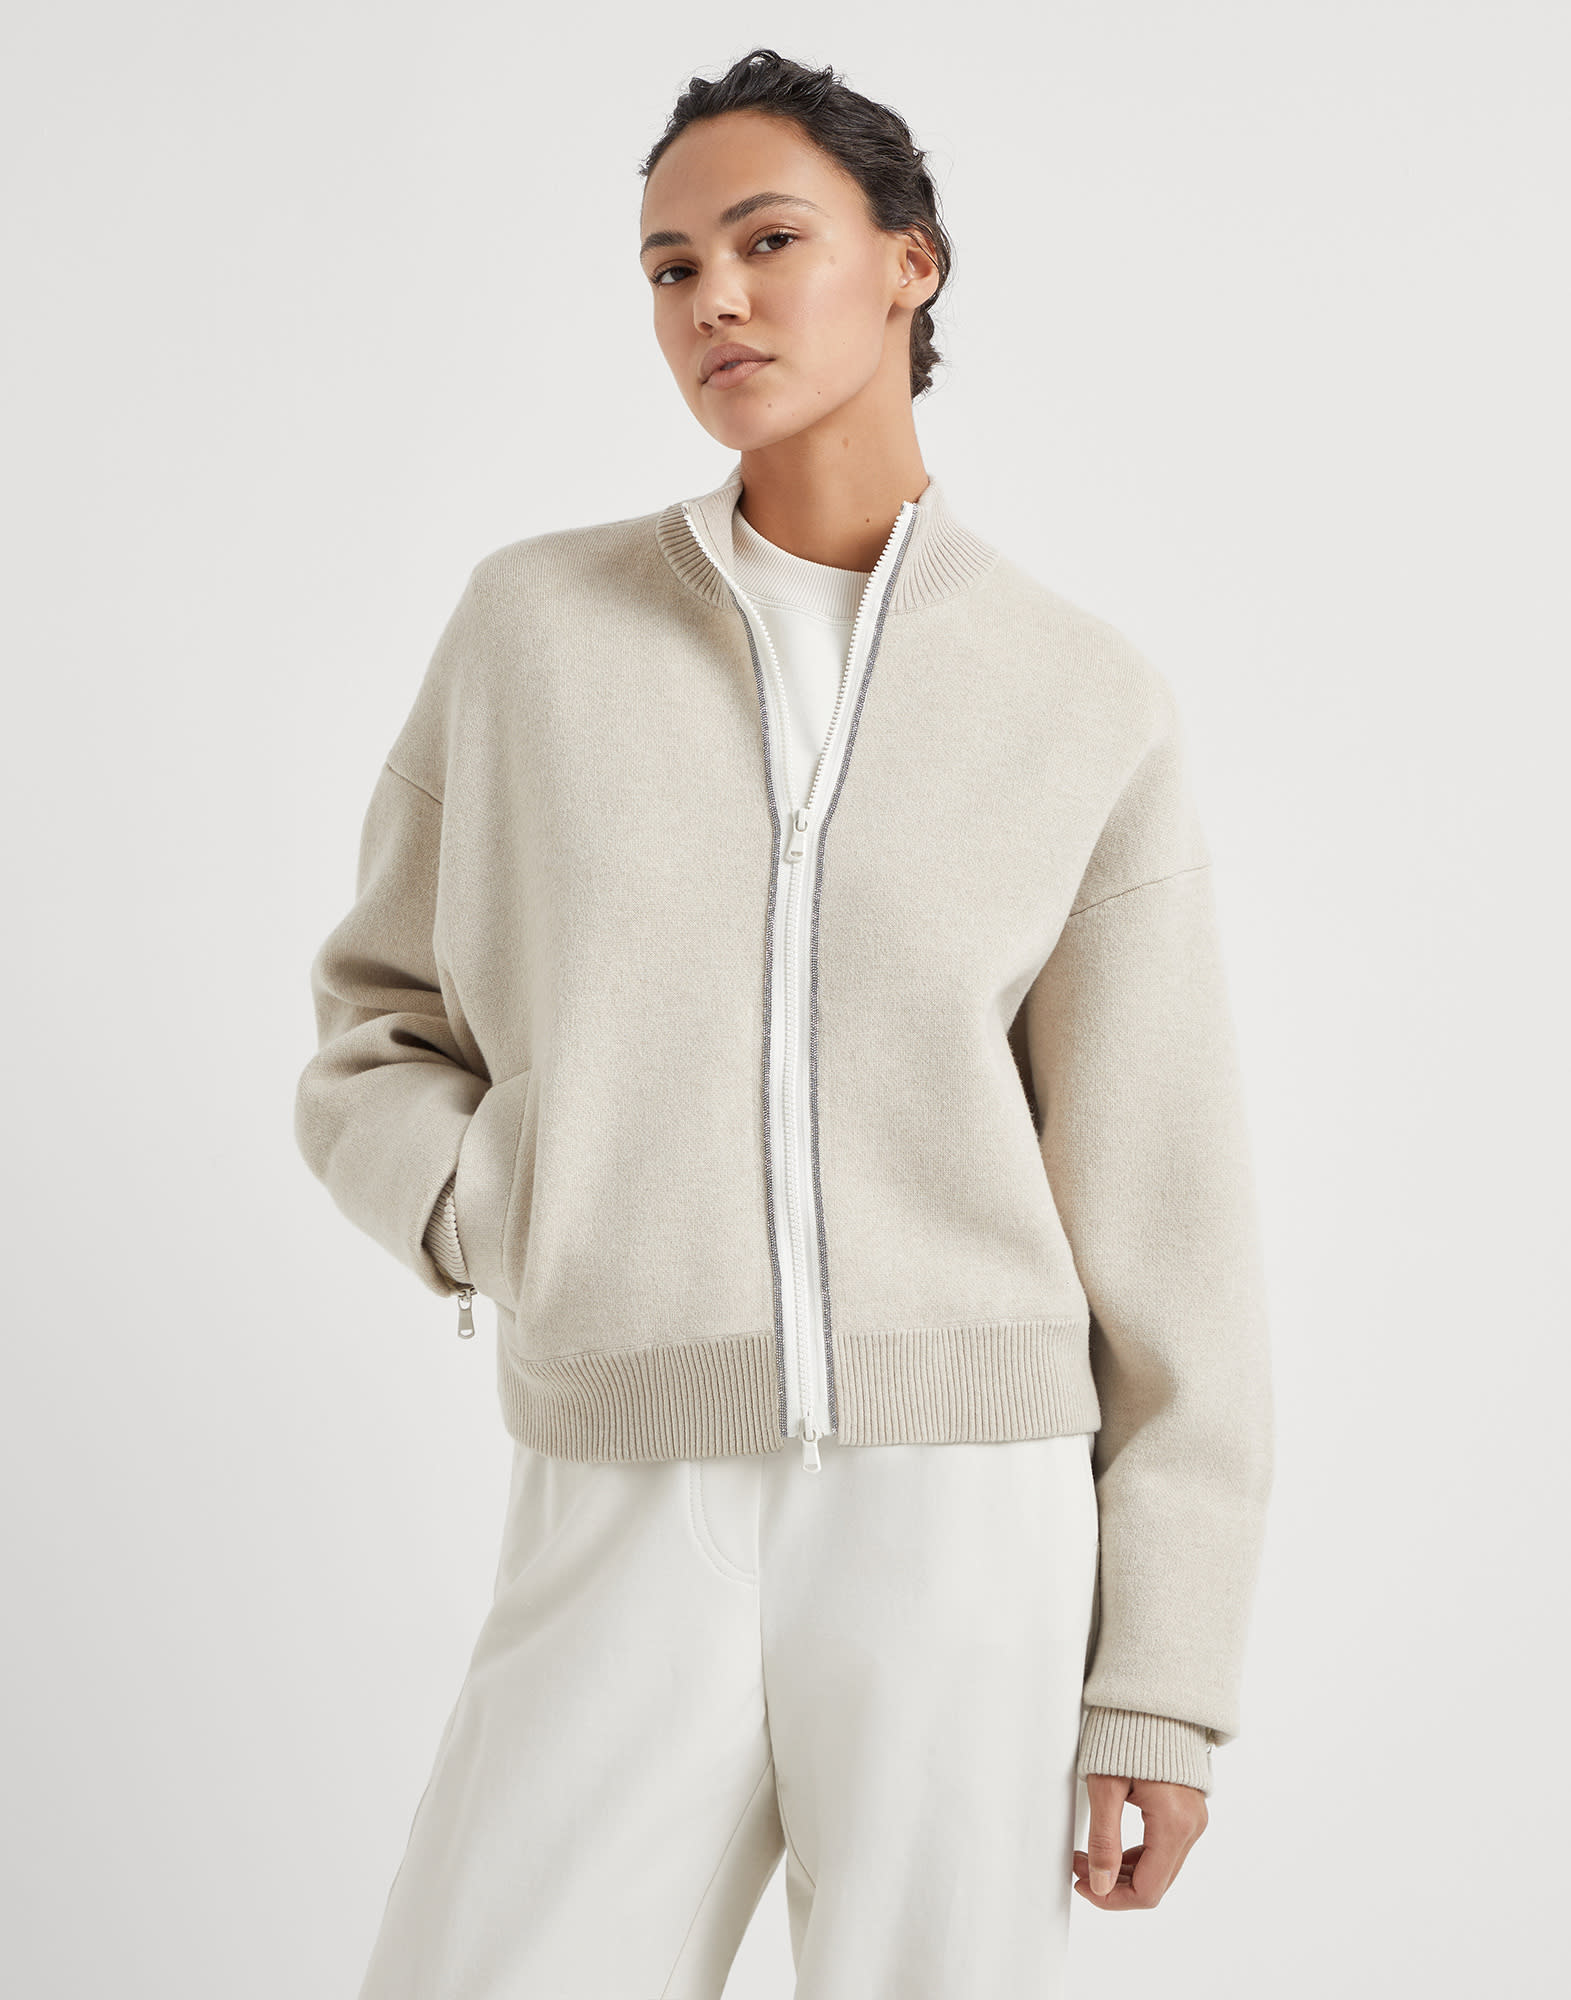 Double-knit outerwear